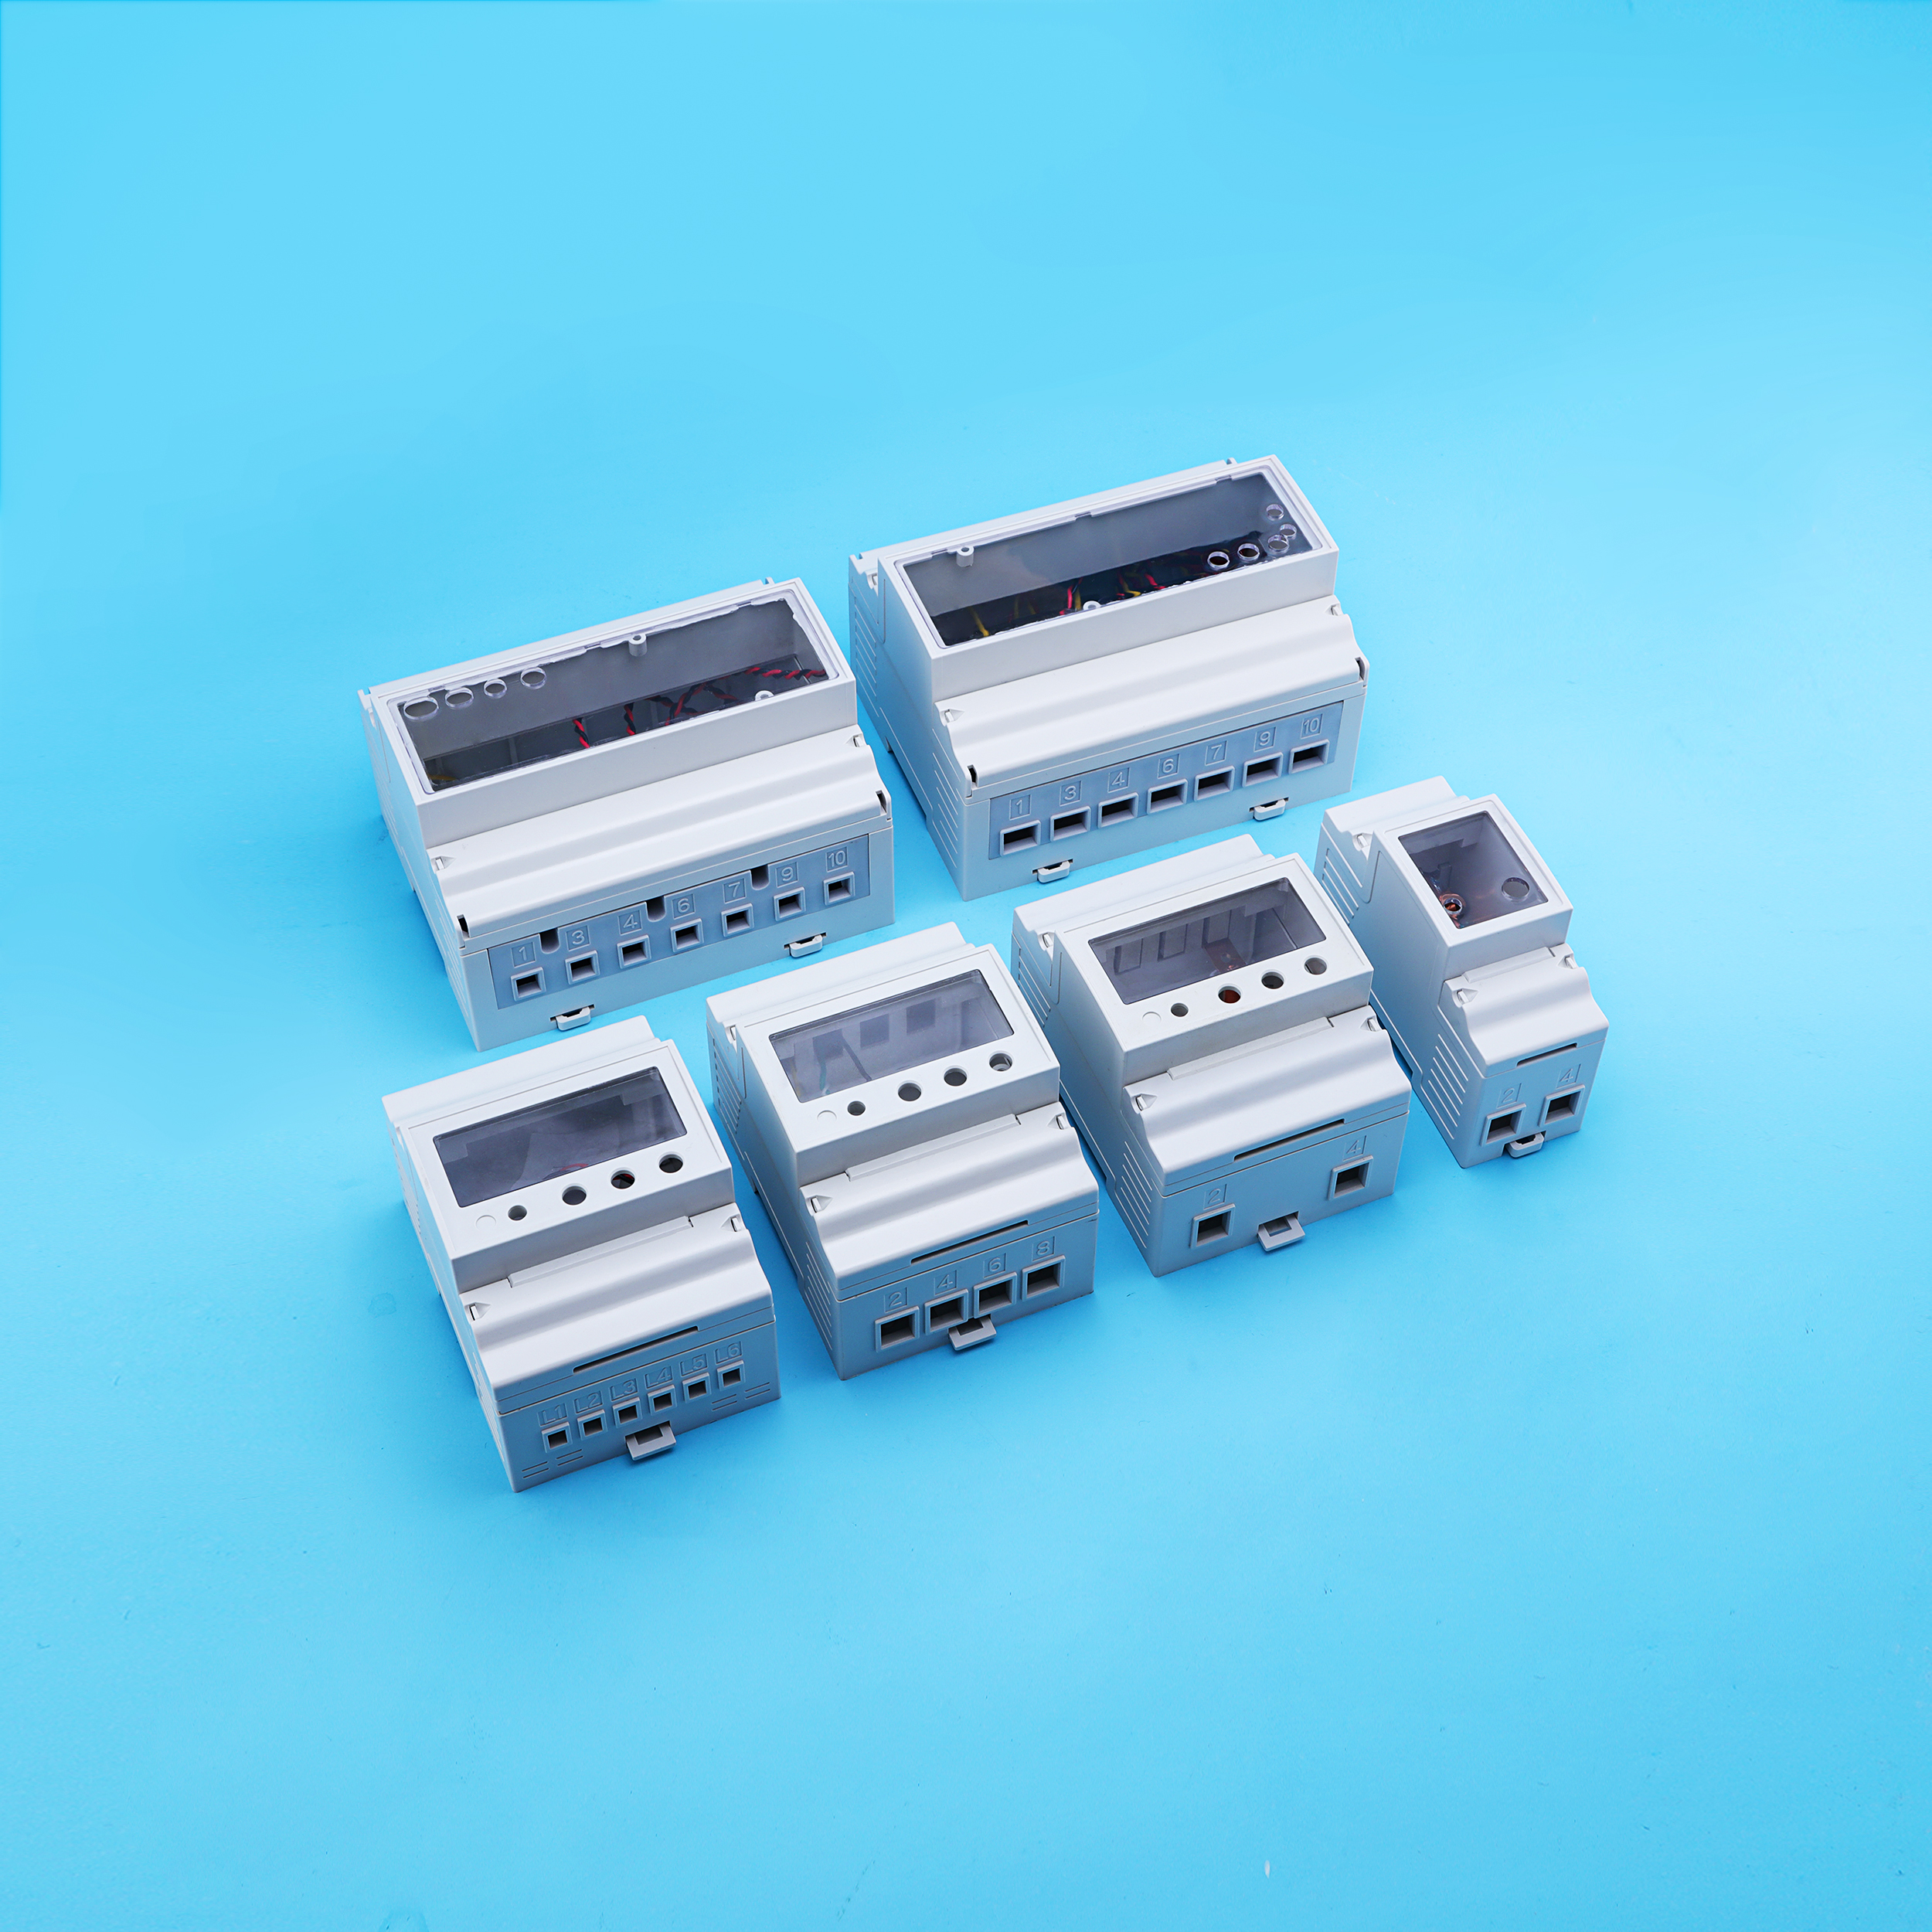 Din rail energy meter enclosures launched.